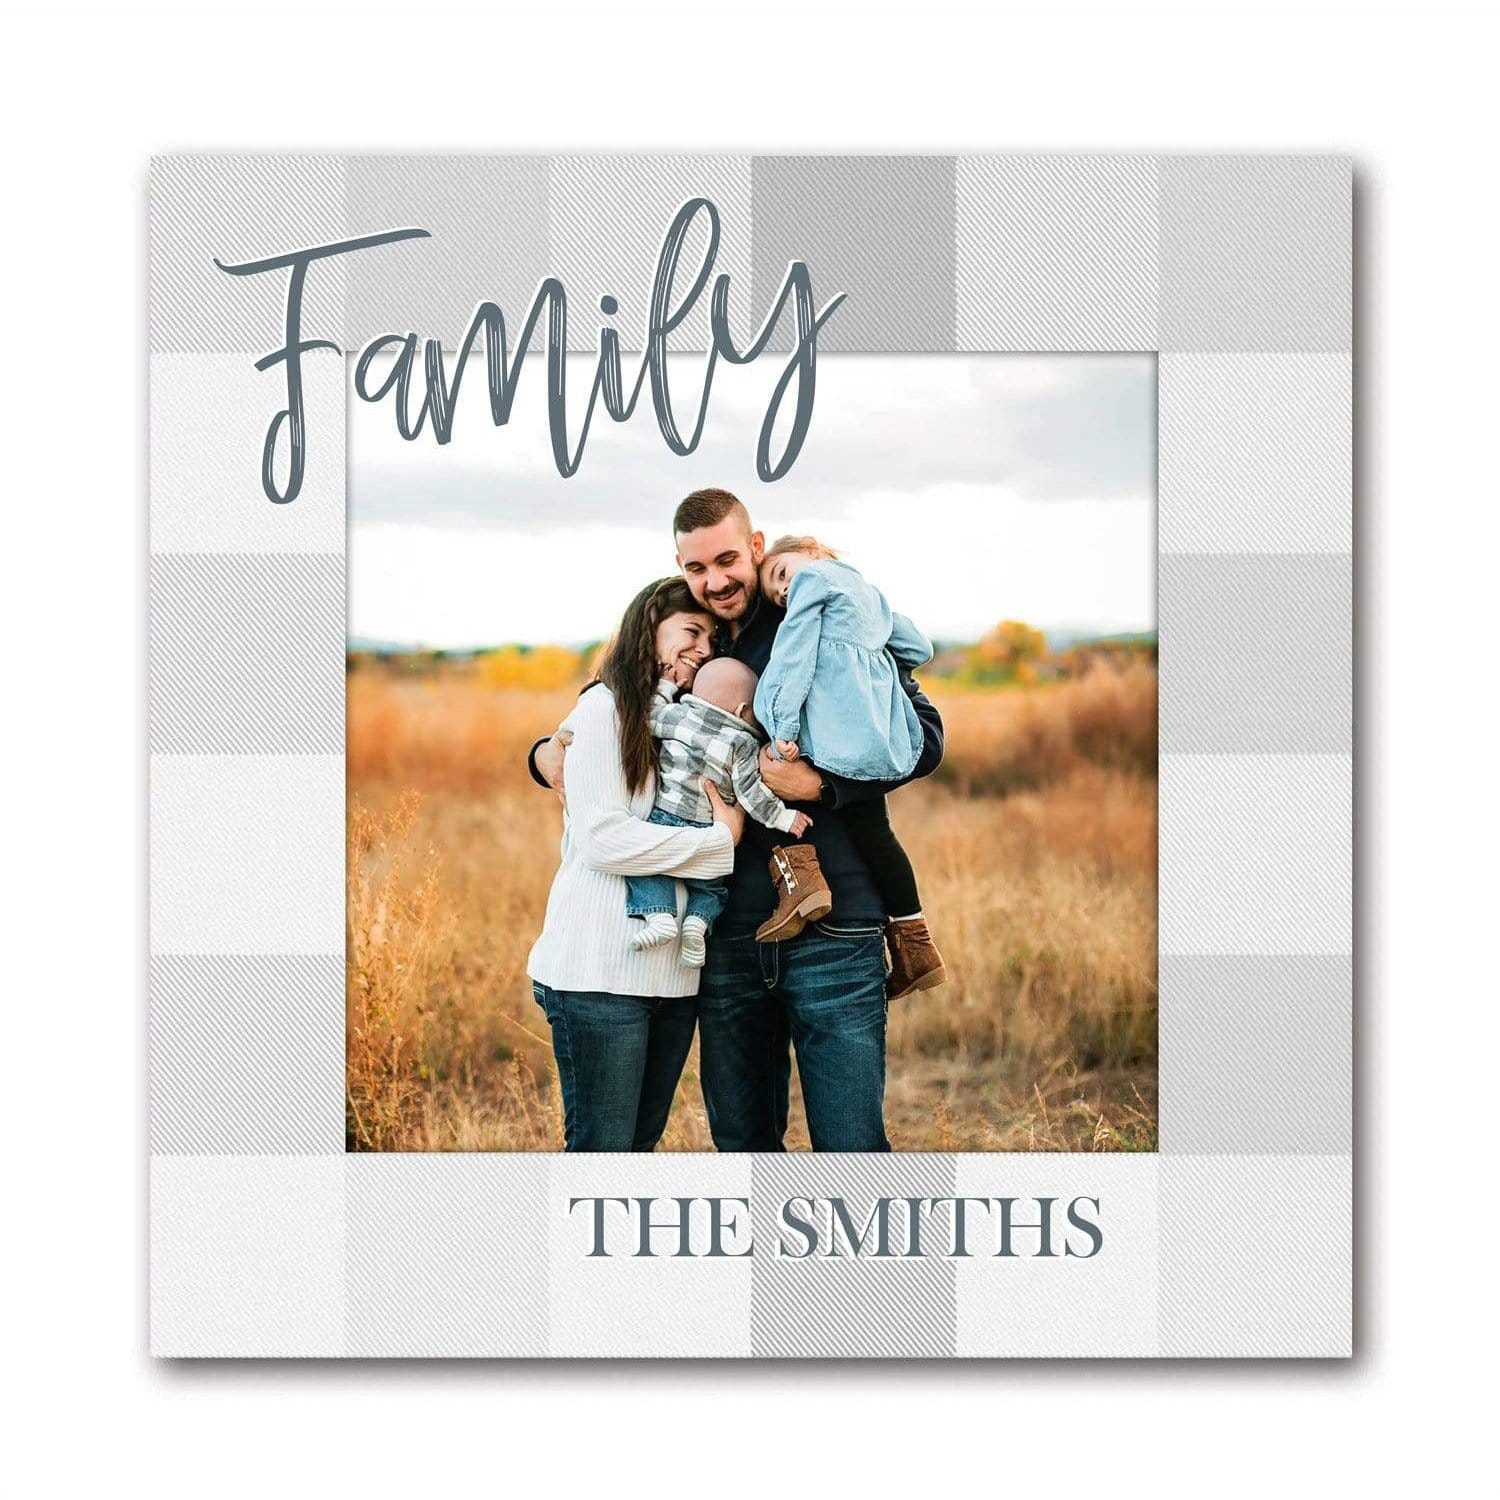 Your Family Photo Printed and Personalized- Mounted to Wood